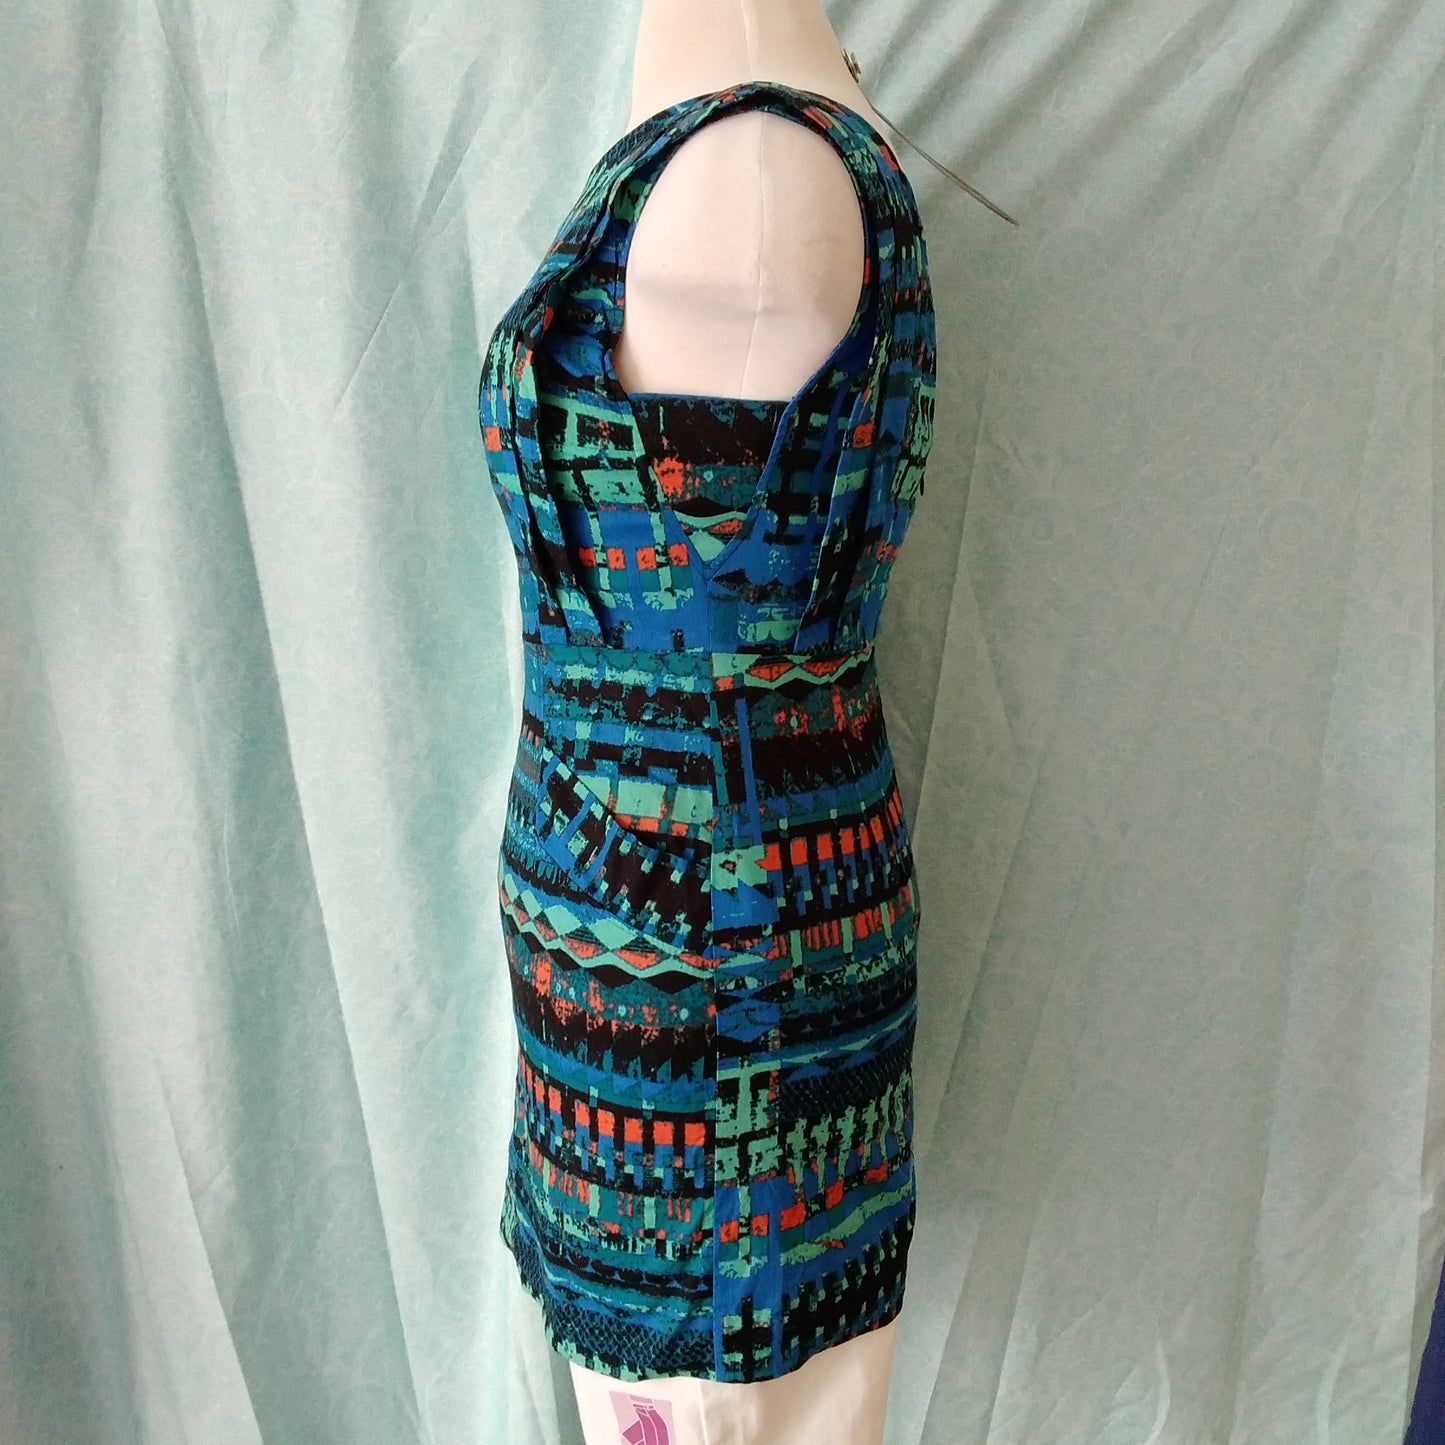 TRACY REESE Blue Multicolor Sleeveless Dress - 6P